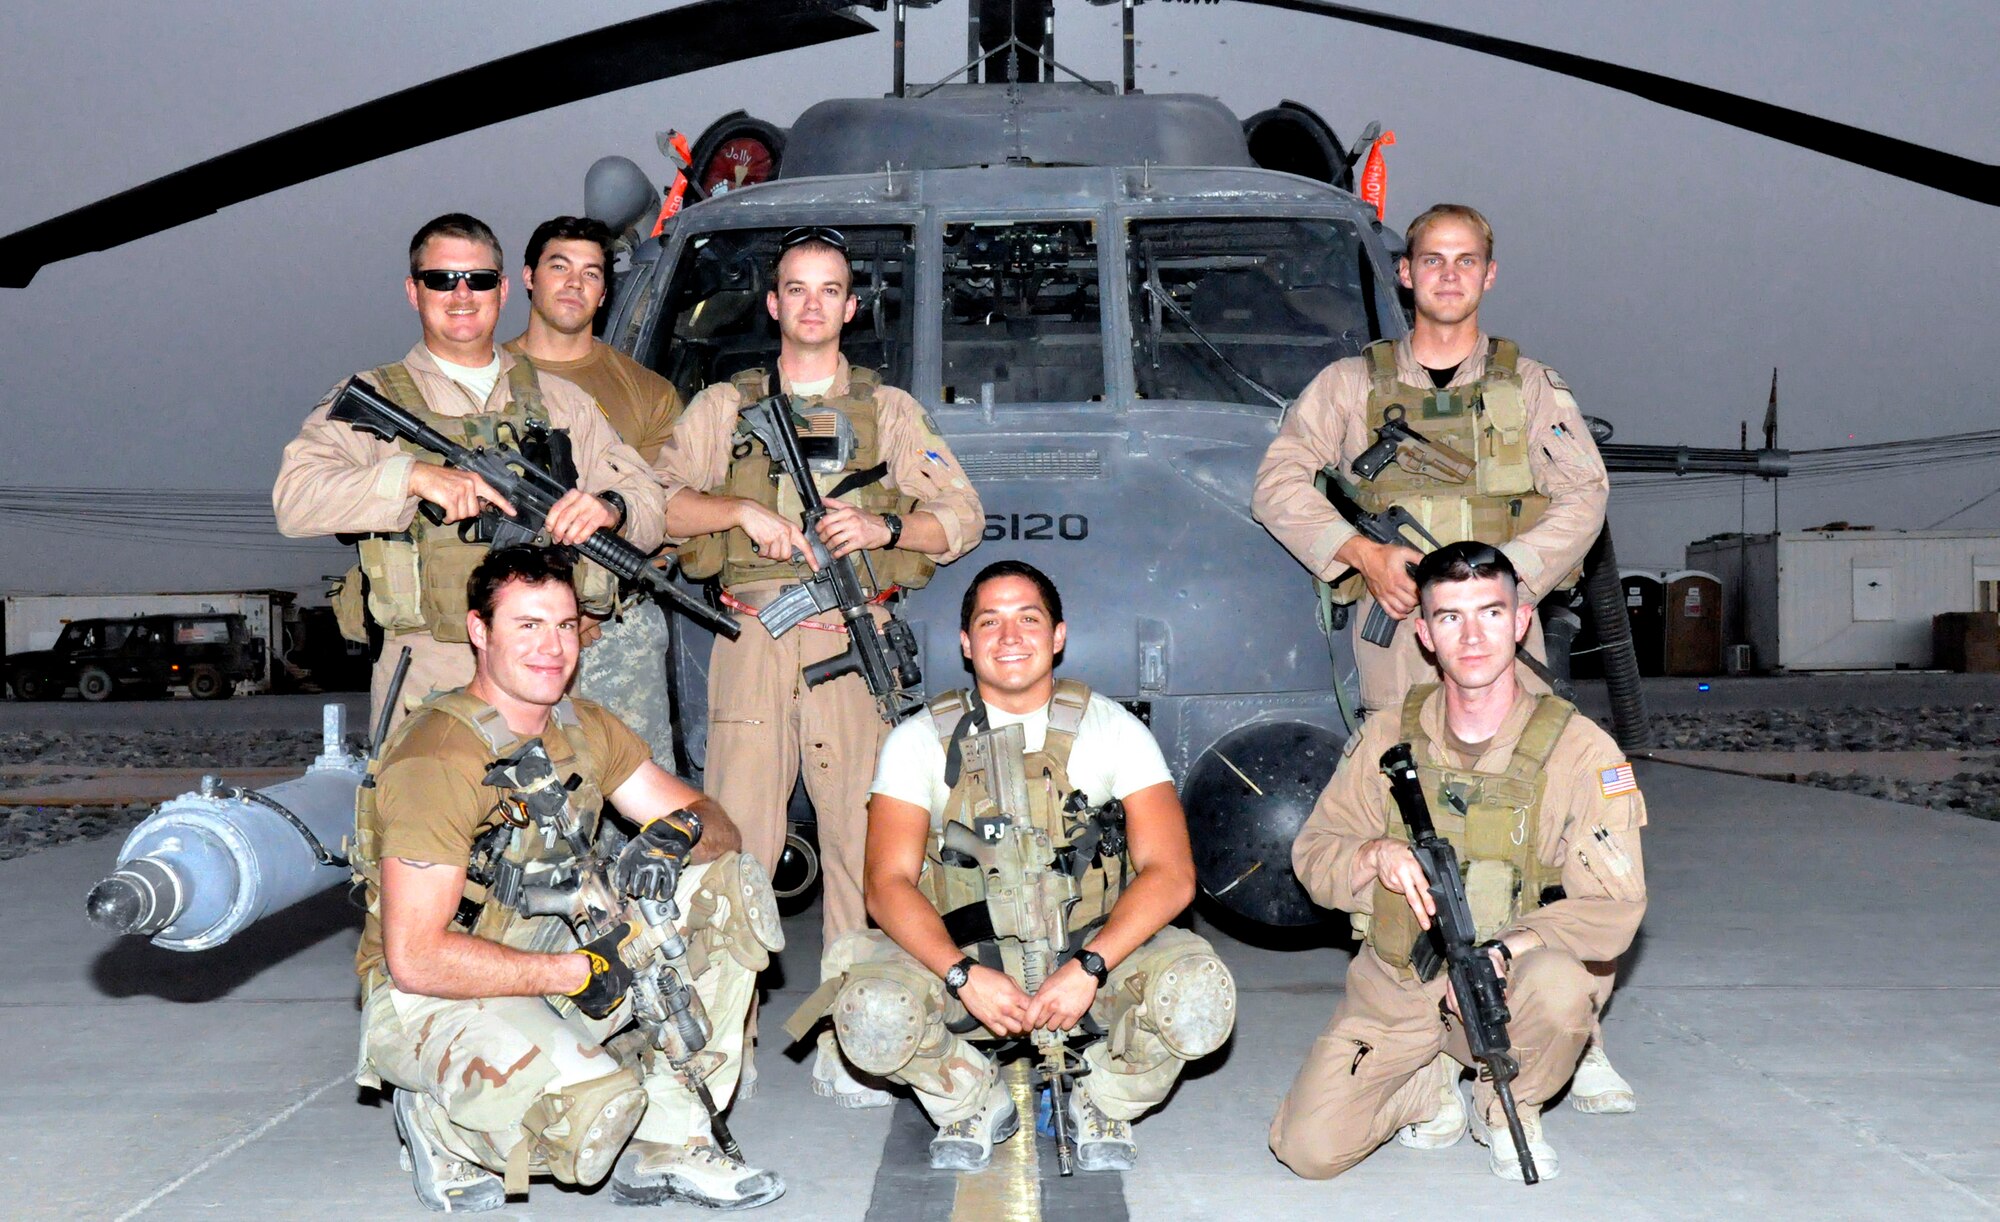 The crew of Pedro 16 at Kandahar Air Base, Afghanistan July 2009. Pictured are Capt. Robert Rosebrough (middle, standing), 1st Lt. Lucas Will (right, standing), Master Sgt. Dustin Thomas (far left, standing), and Staff Sgt. Tim Philpott (right, kneeling). The four Airmen, from Kadena Air Base’s 33rd Rescue Squadron, were recently announced as the winners of the MacKay Trophy and the Jolly Green Association Award for a mission to rescue Army Soldiers and fellow Airmen July 29, 2009 during their deployment to Kandahar Air Base. At the time of the mission they were attached to the 129th Expeditionary Rescue Squadron. (Courtesy Photo)